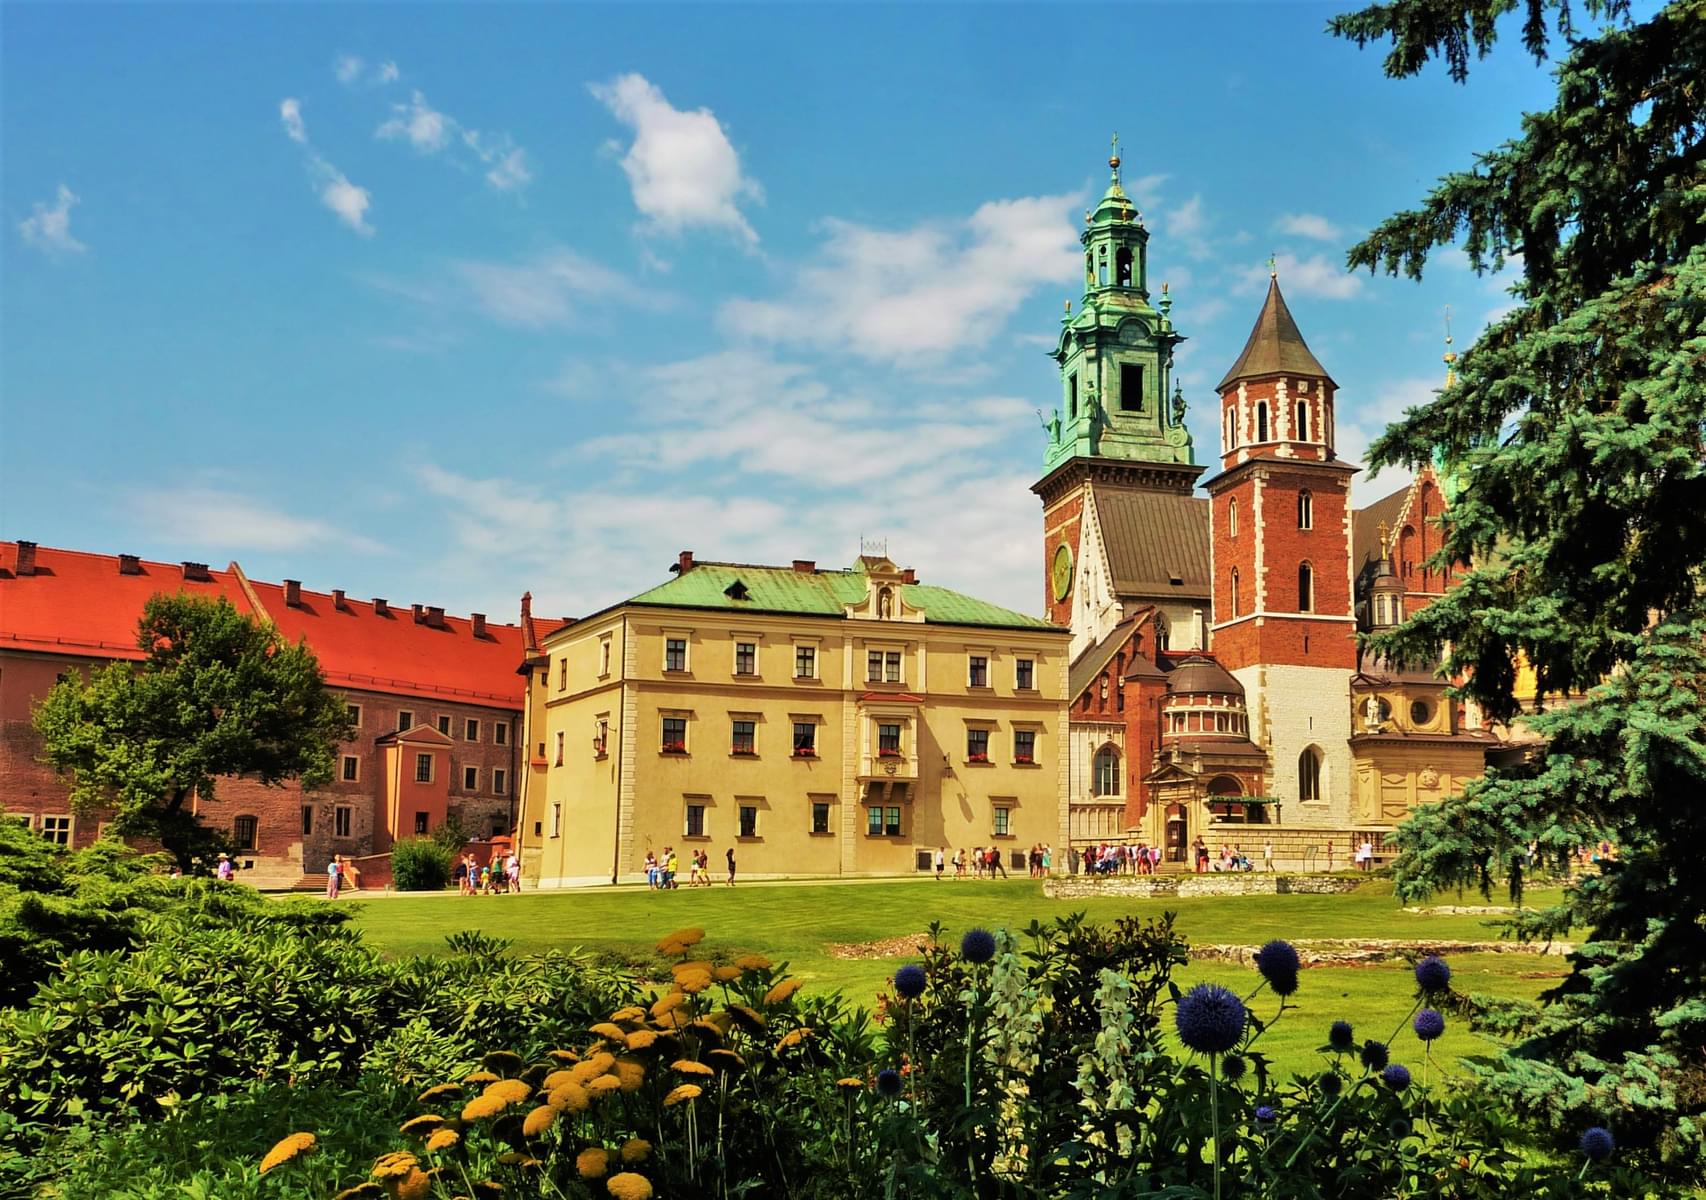 Why To Book Wawel Castle Tickets?